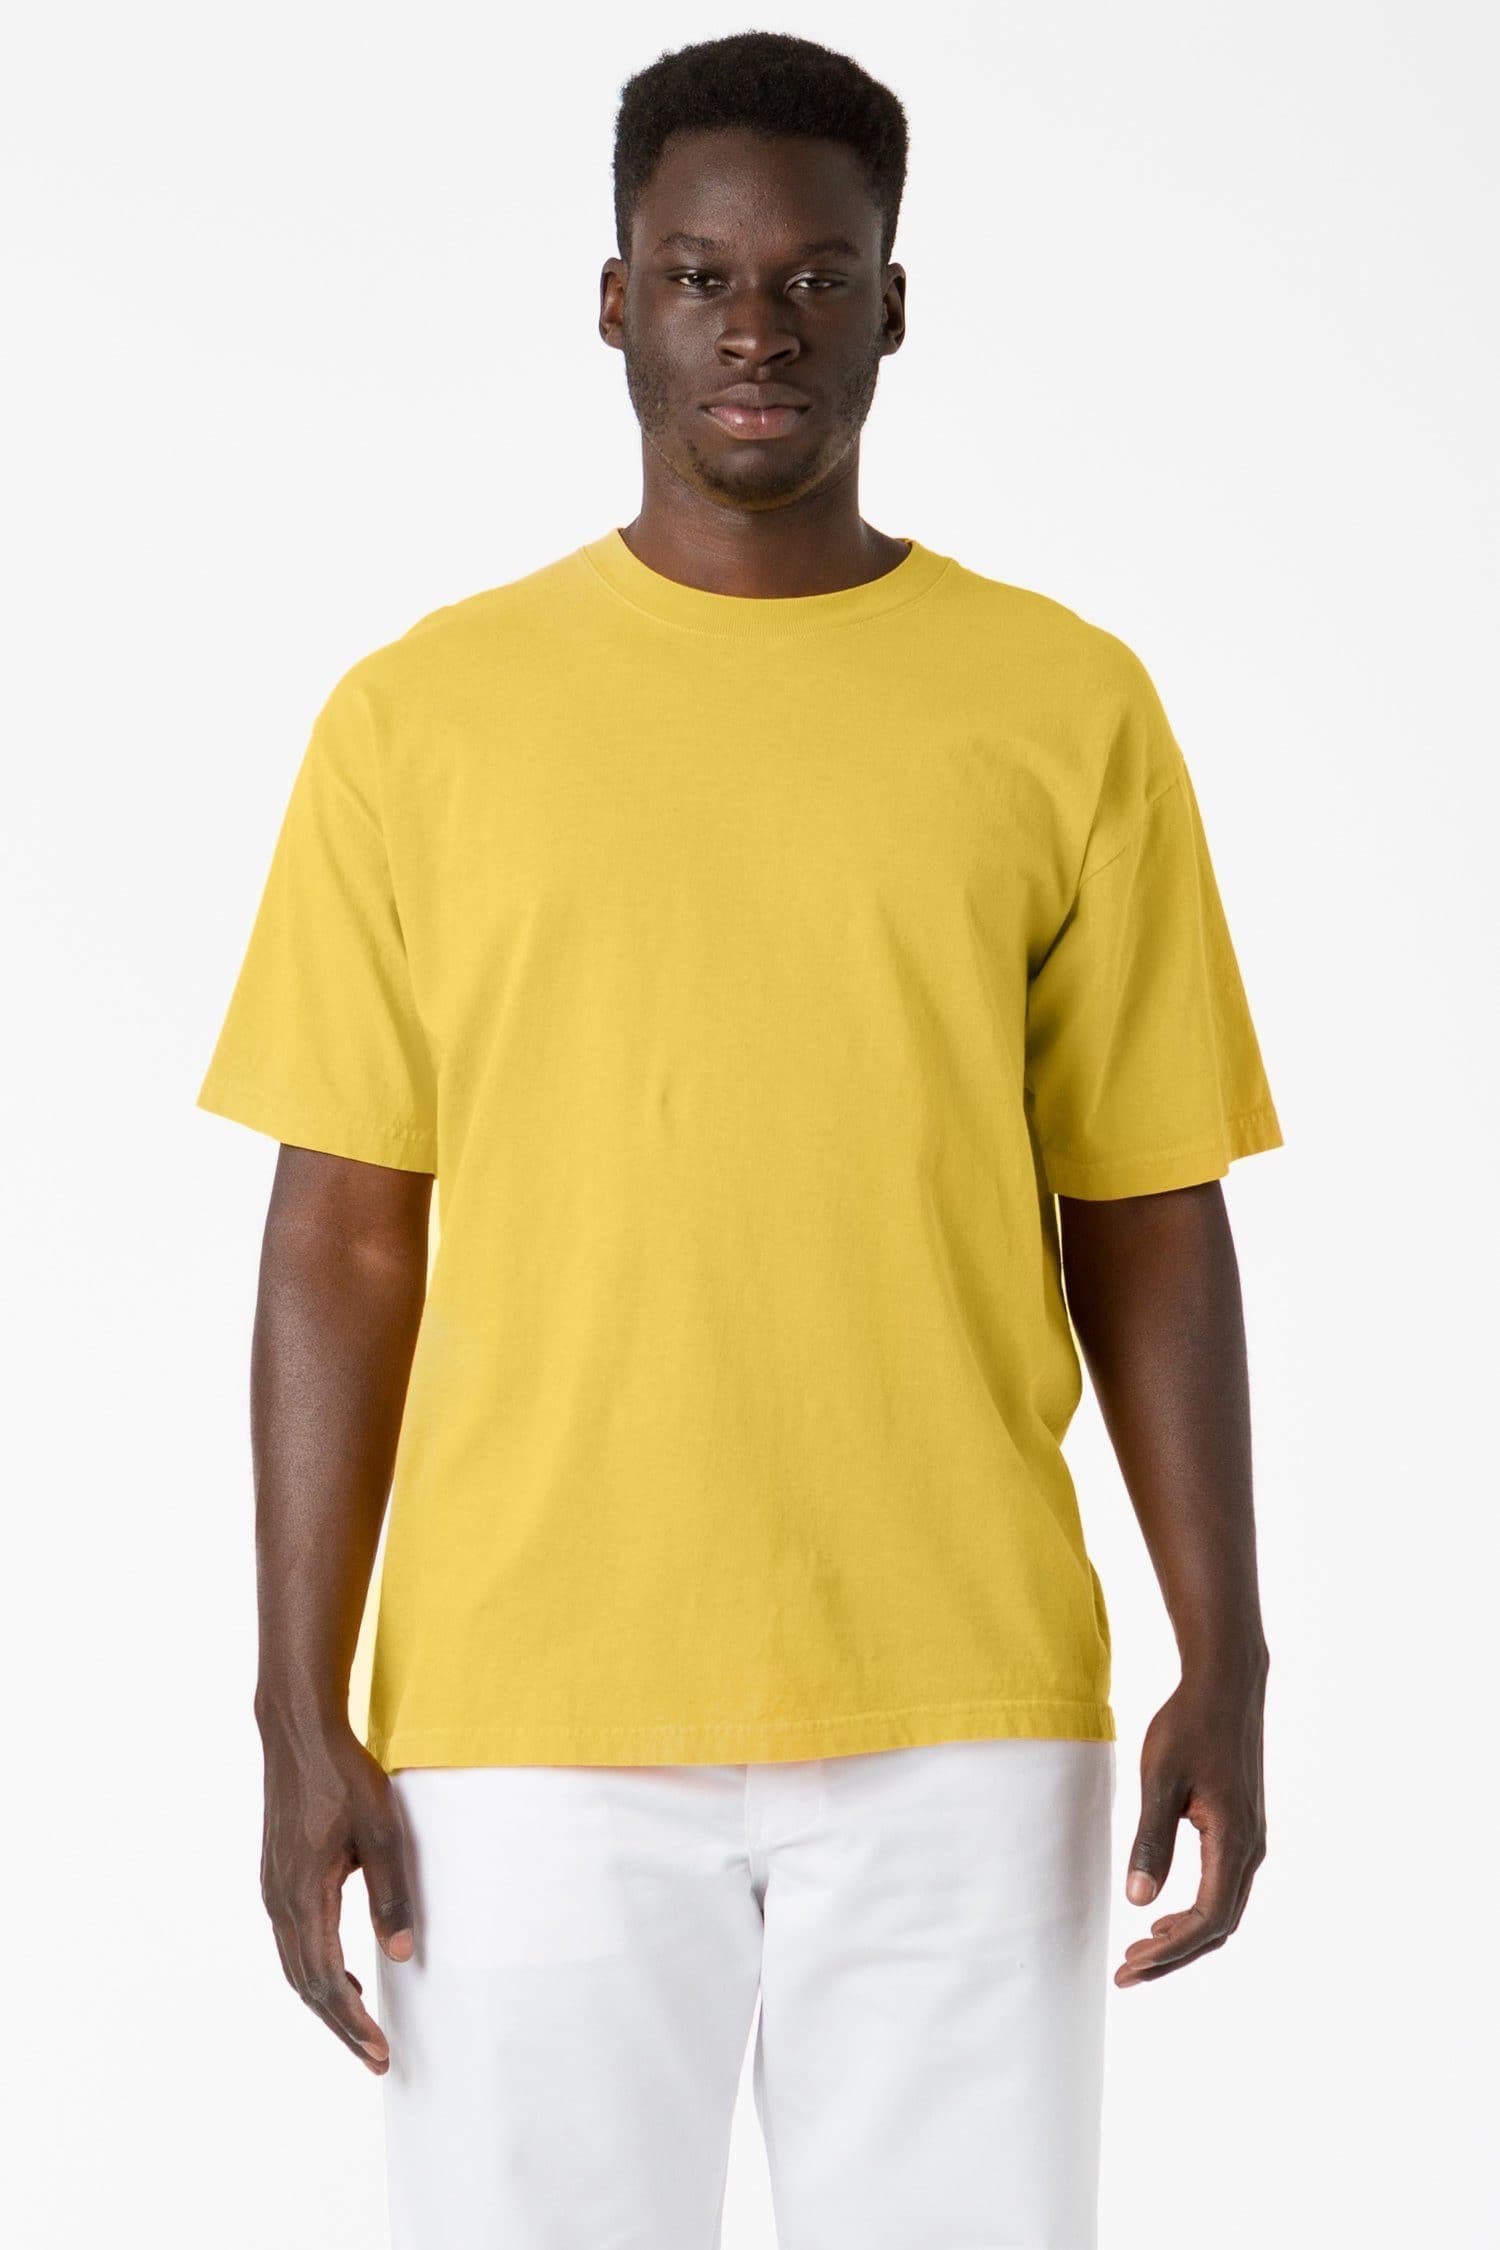 Los Angeles Apparel | The 1801 | Short Sleeve Shirt in Spectra Yellow, Size Medium | Crew Neck